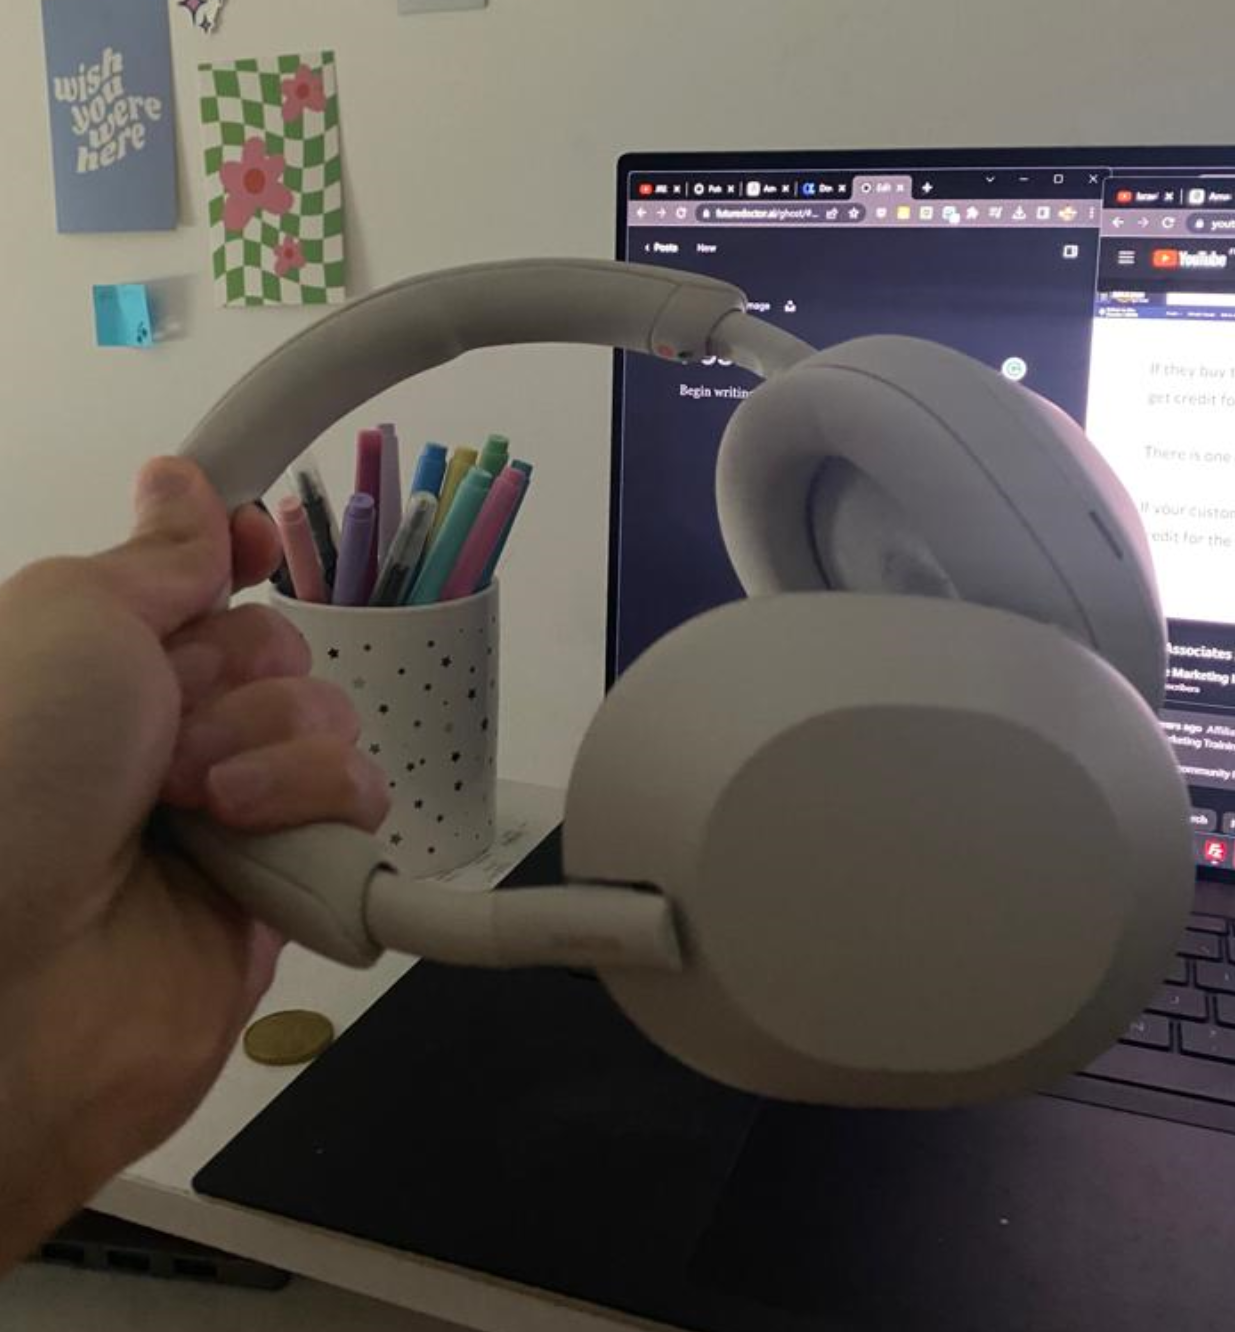 My XM5 is hands down the best noise-canceling headphones I have ever had.